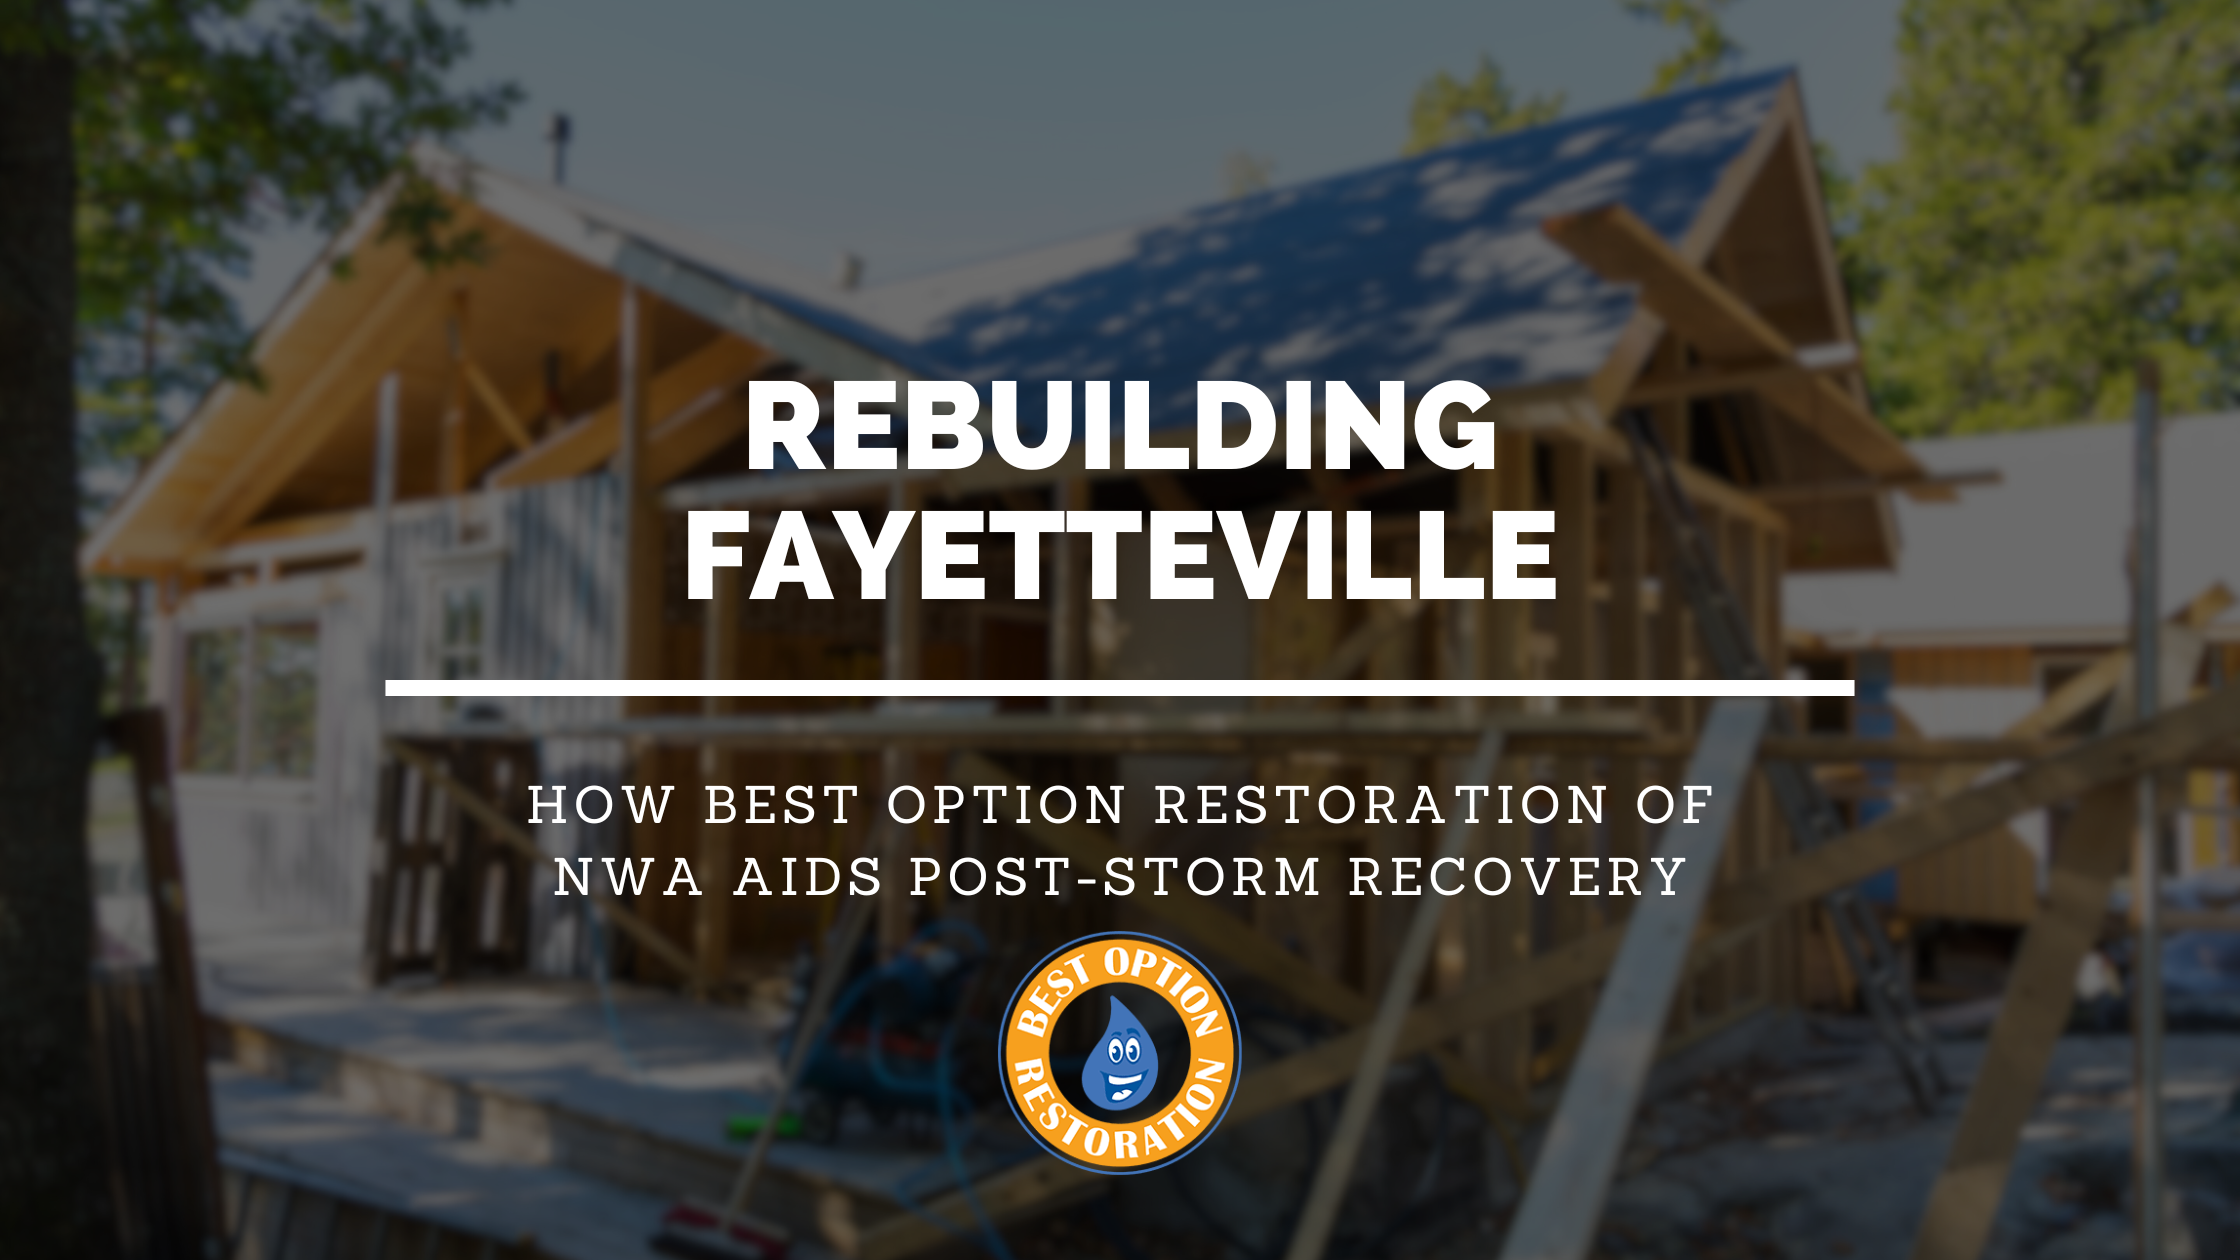 Rebuilding Fayetteville Together: How Best Option Restoration of NWA Aids Post-Storm Recovery